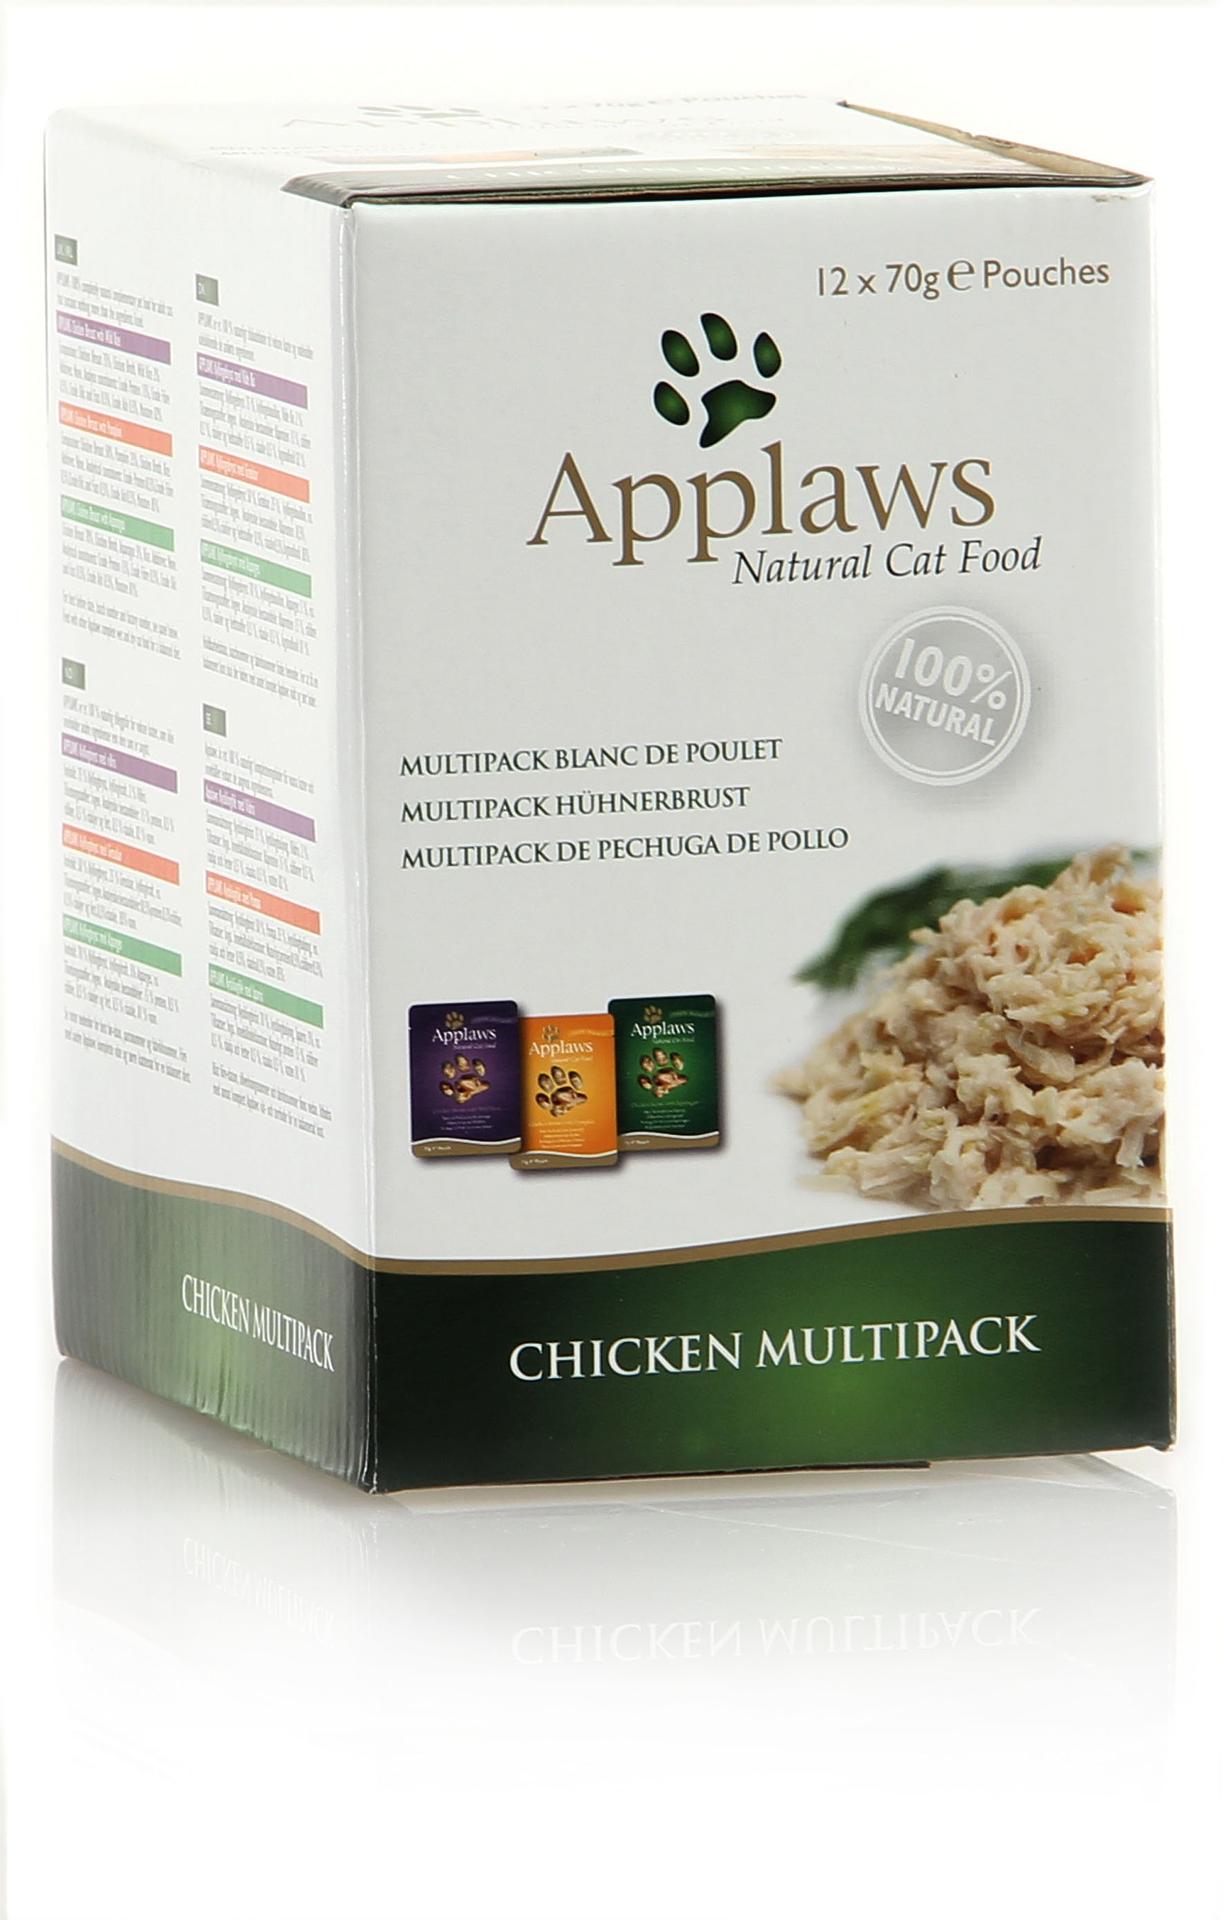 Applaws Multipack Beutel, 12x70g